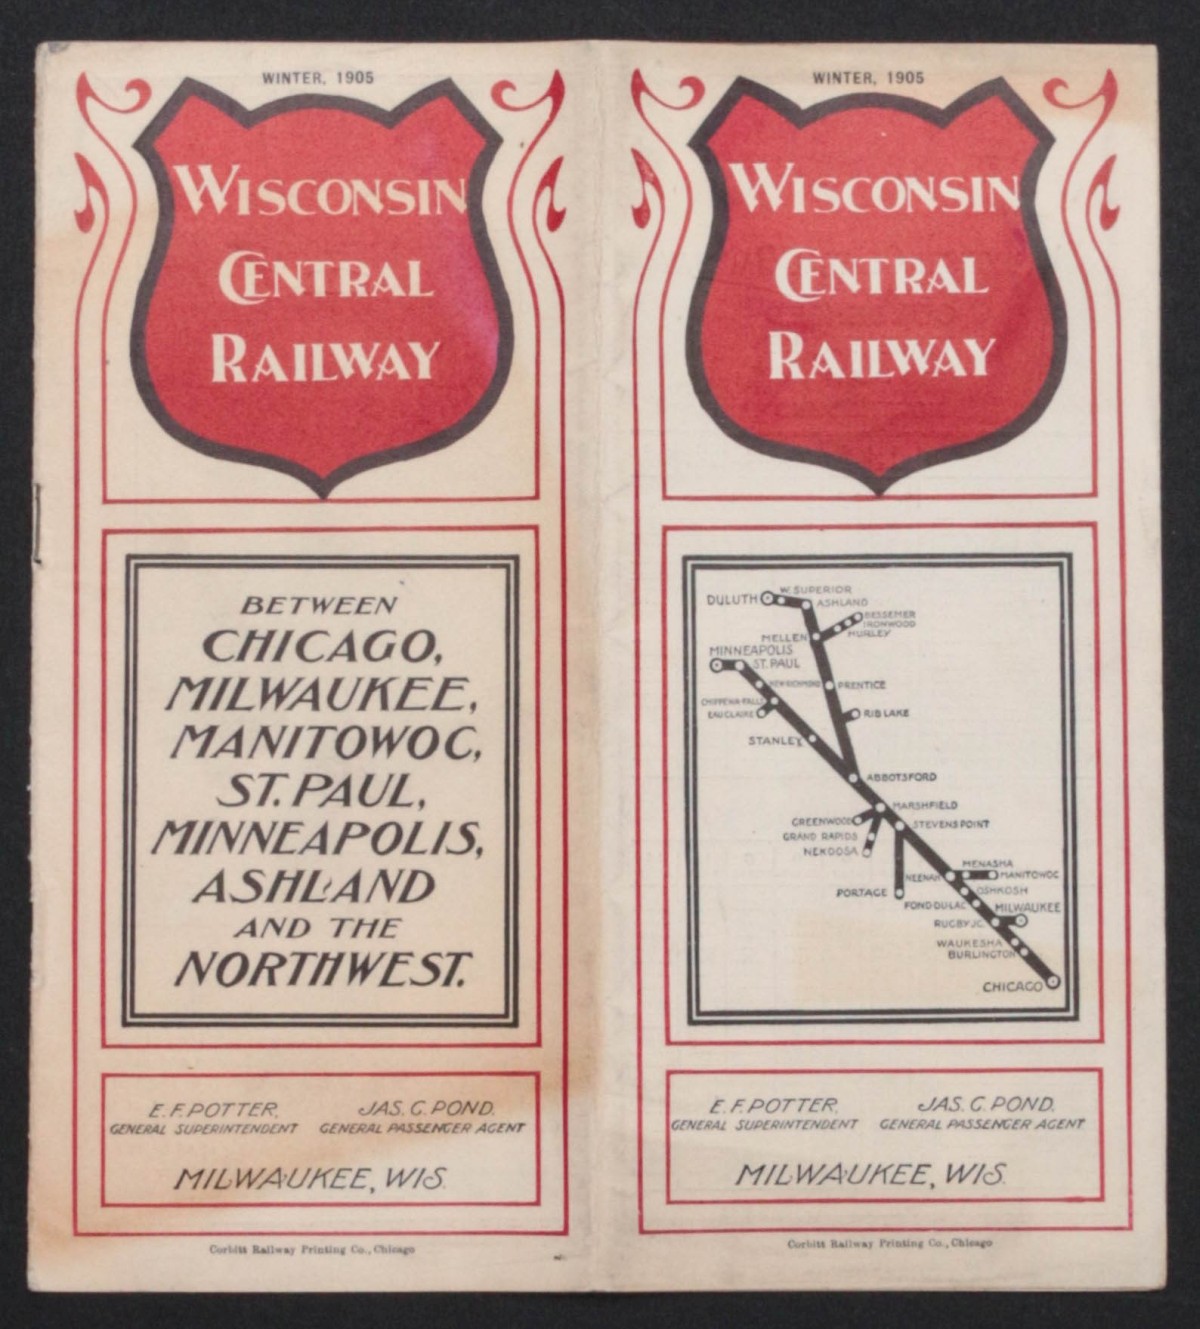 WISCONSIN CENTRAL RY TIMETABLE FOR WINTER 1905